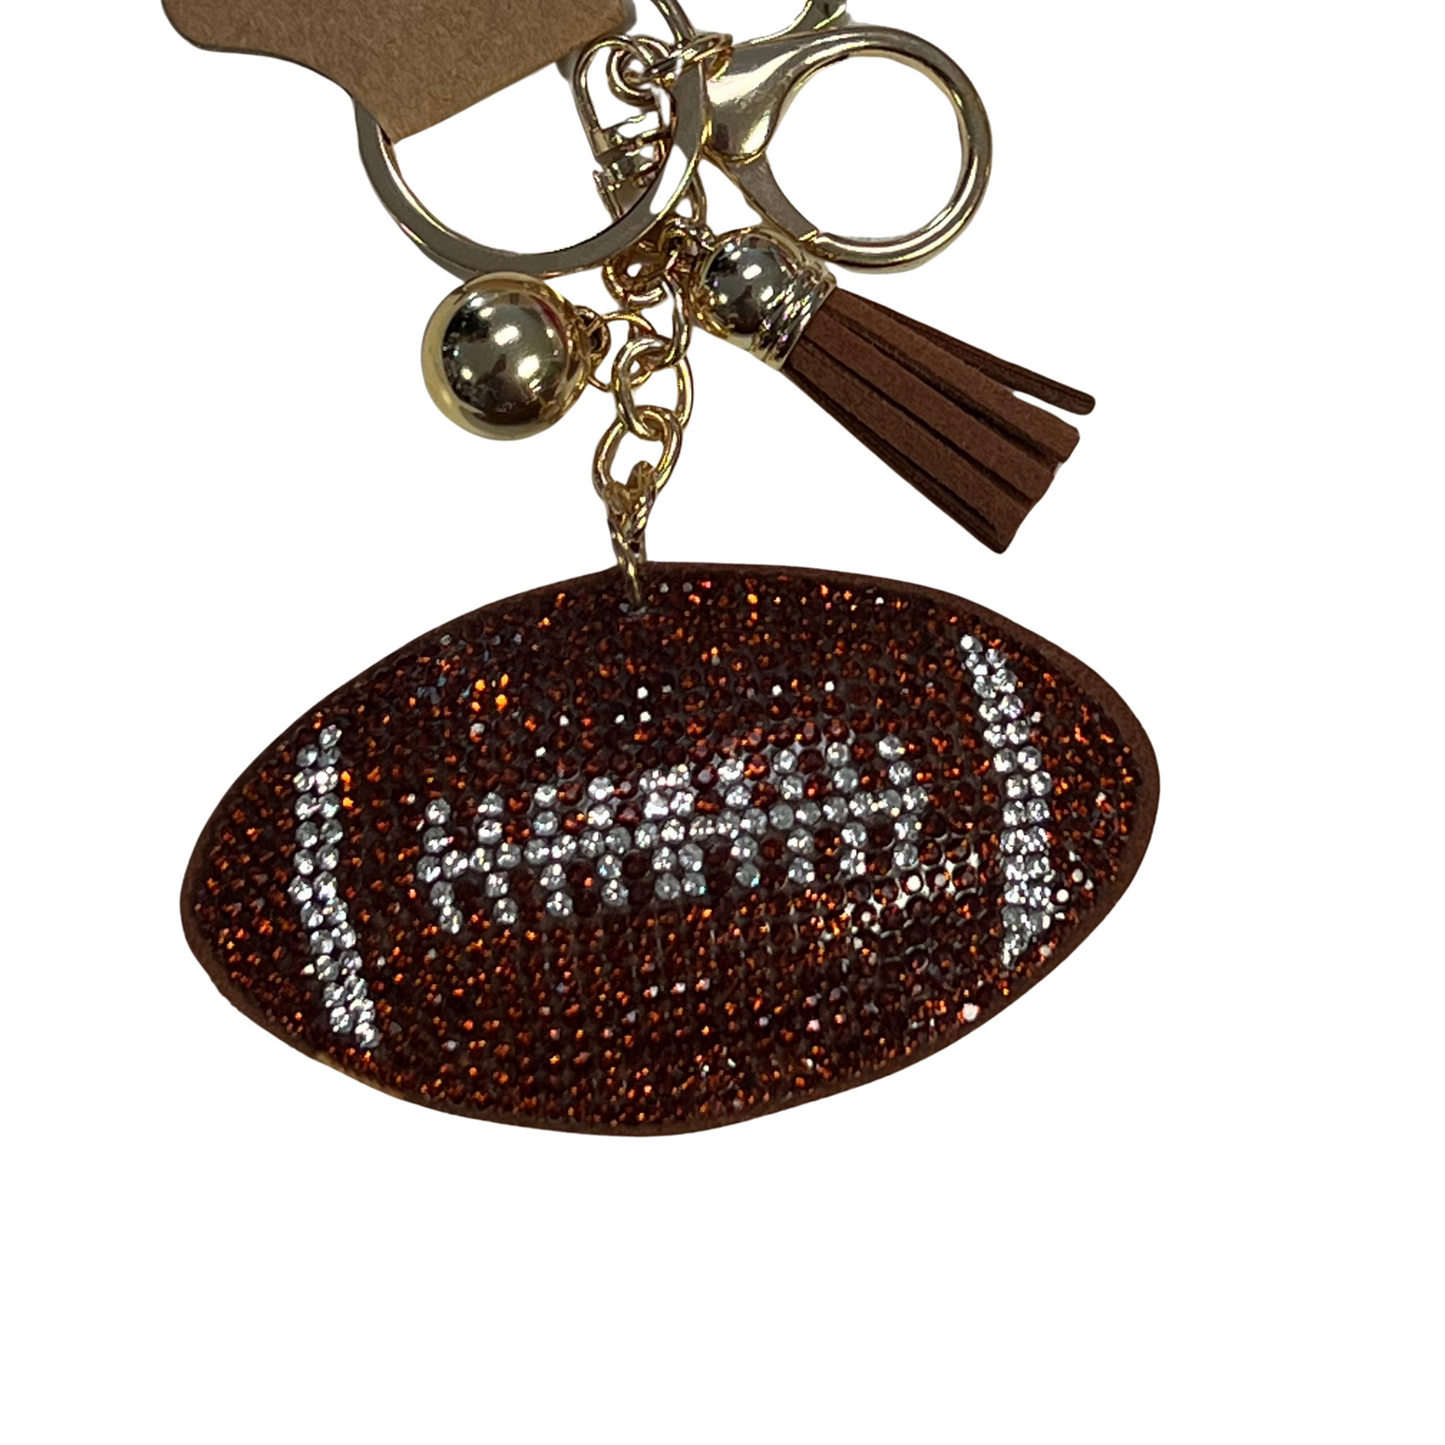 This Rhinestone Game Day Keychain is a fashionable and eye-catching way to show your team spirit. Choose from a blue paw, an orange paw, or a football, each embellished with sparkling rhinestones. Carry your keys with style on game day and show your support for your favorite team.